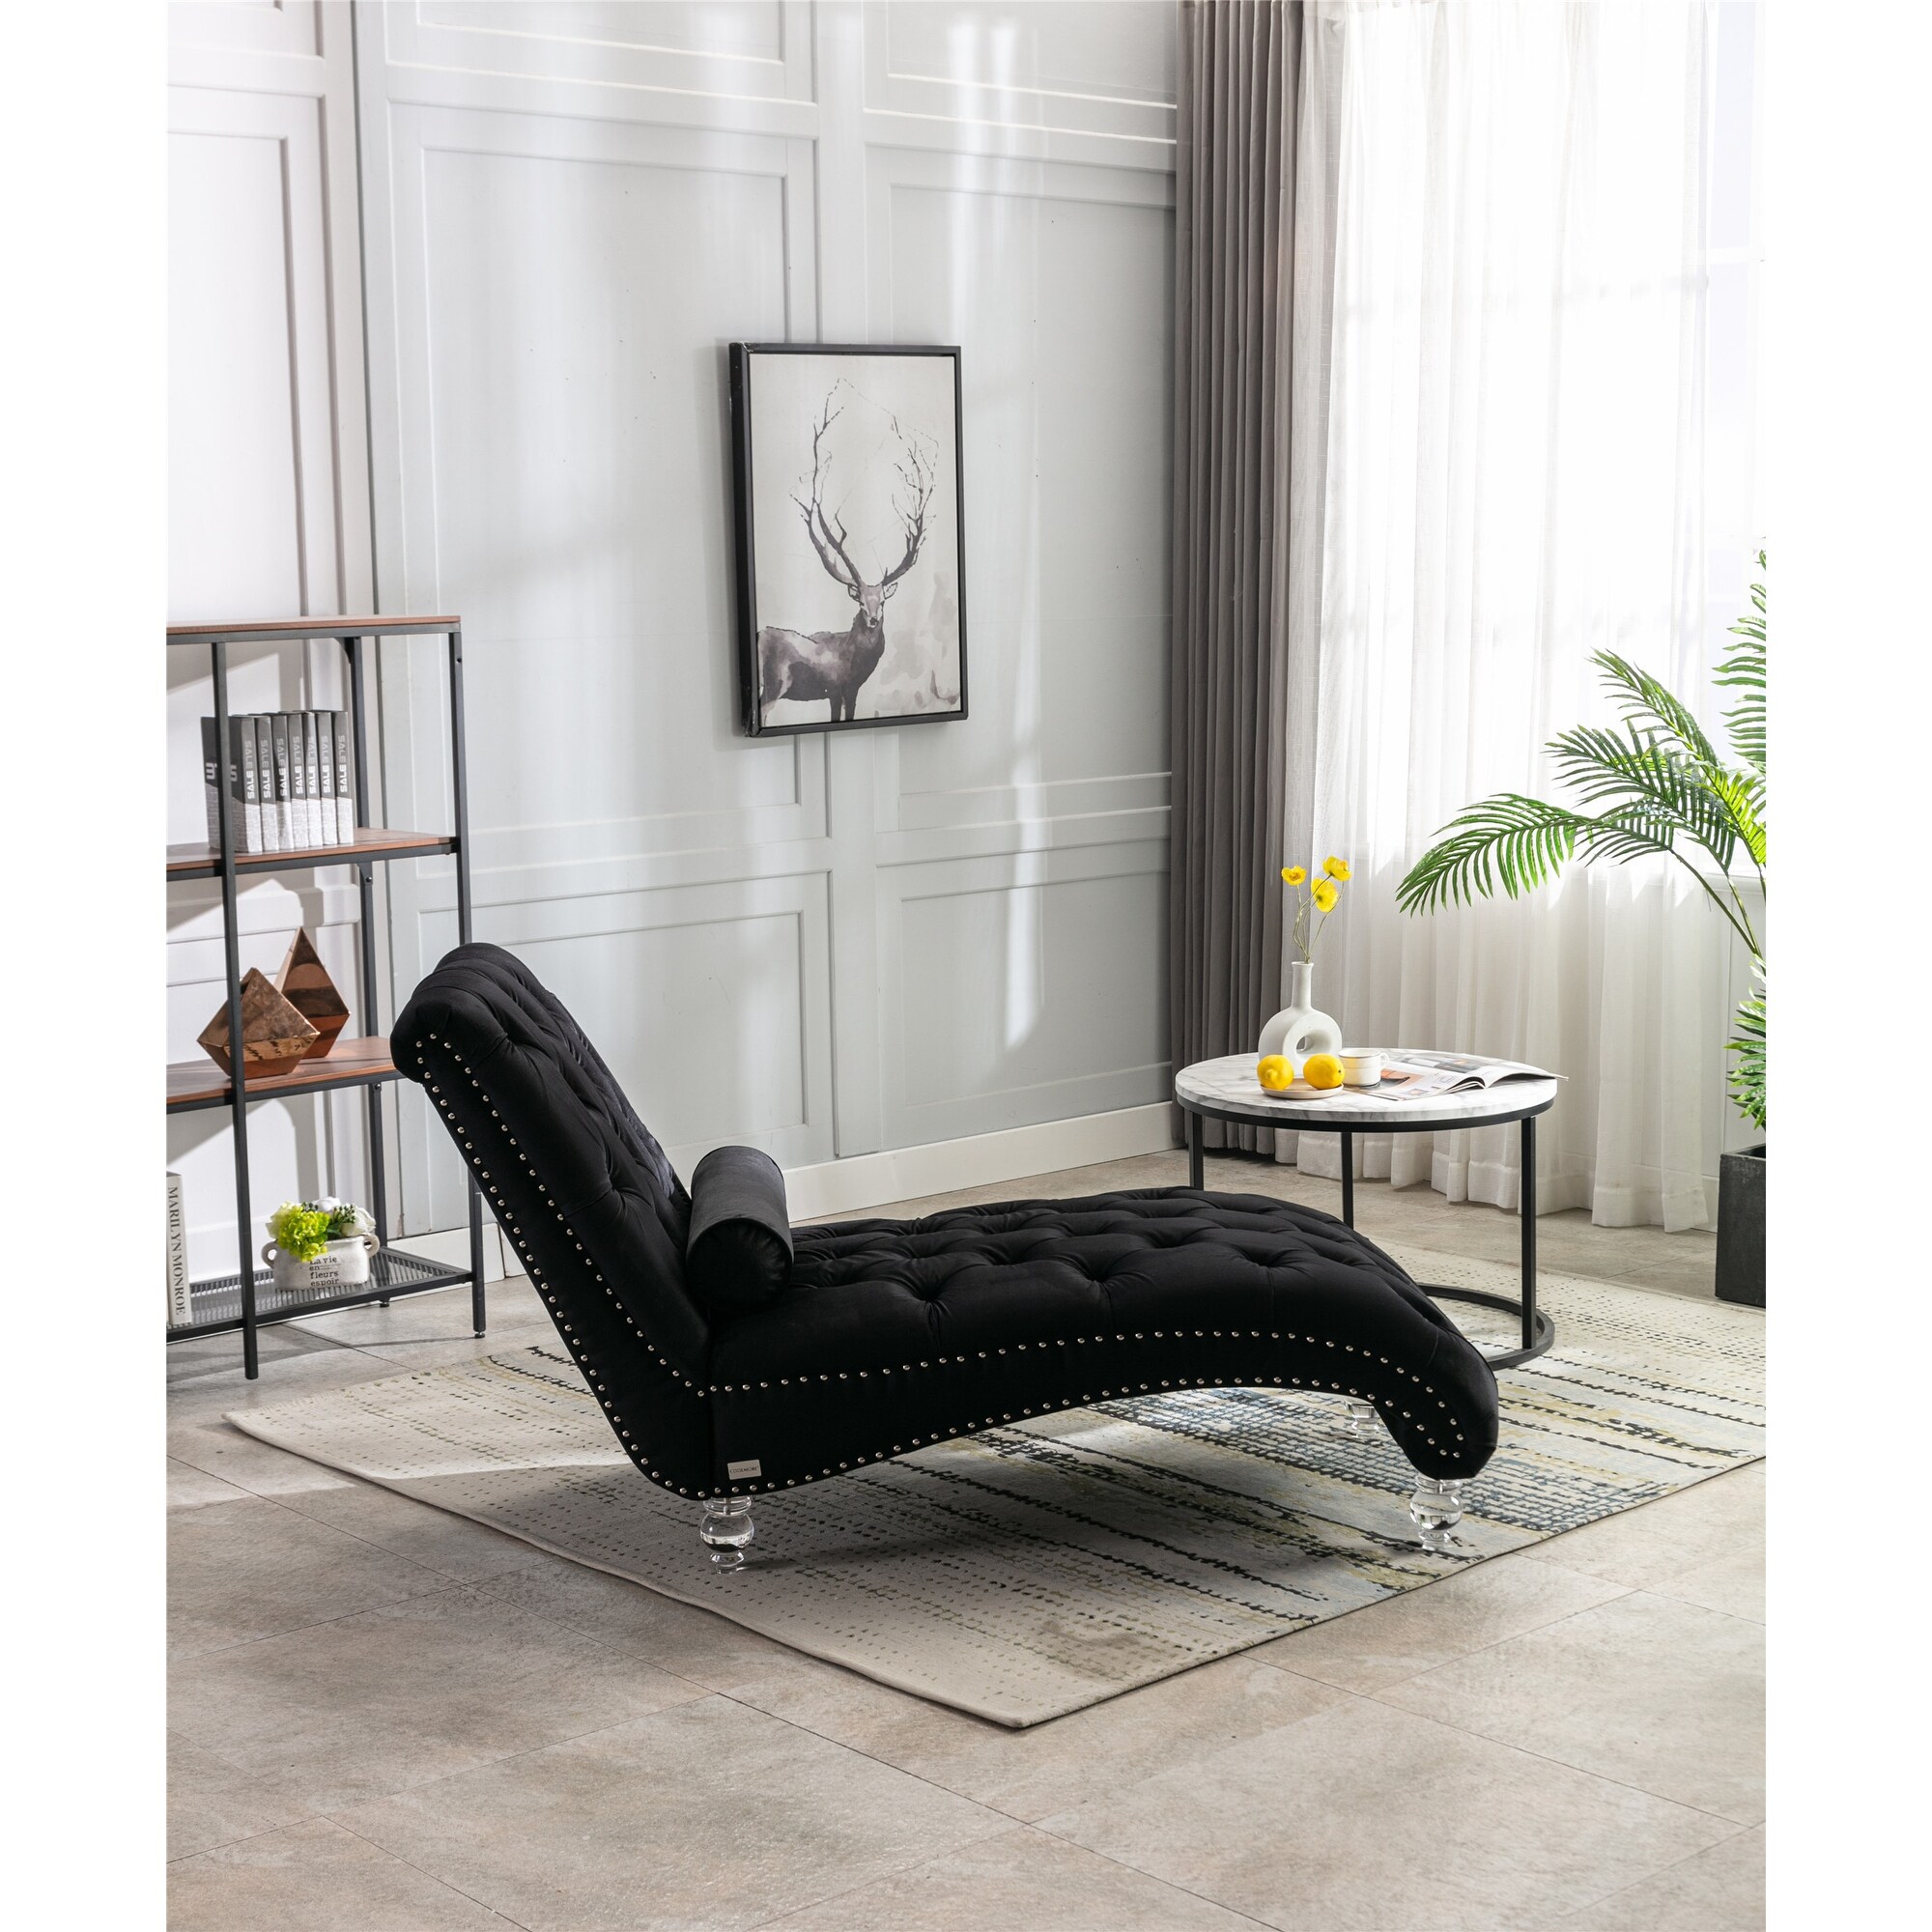 https://ak1.ostkcdn.com/images/products/is/images/direct/a8a12cc5c233caf4202fd25d911bc04b1f8d85c6/Modern-Luxury-Style-Leisure-Concubine-Sofa-with-Solid-Acrylic-Feet%2C-Comfortable-Sleeper-Chair-for-Adults.jpg